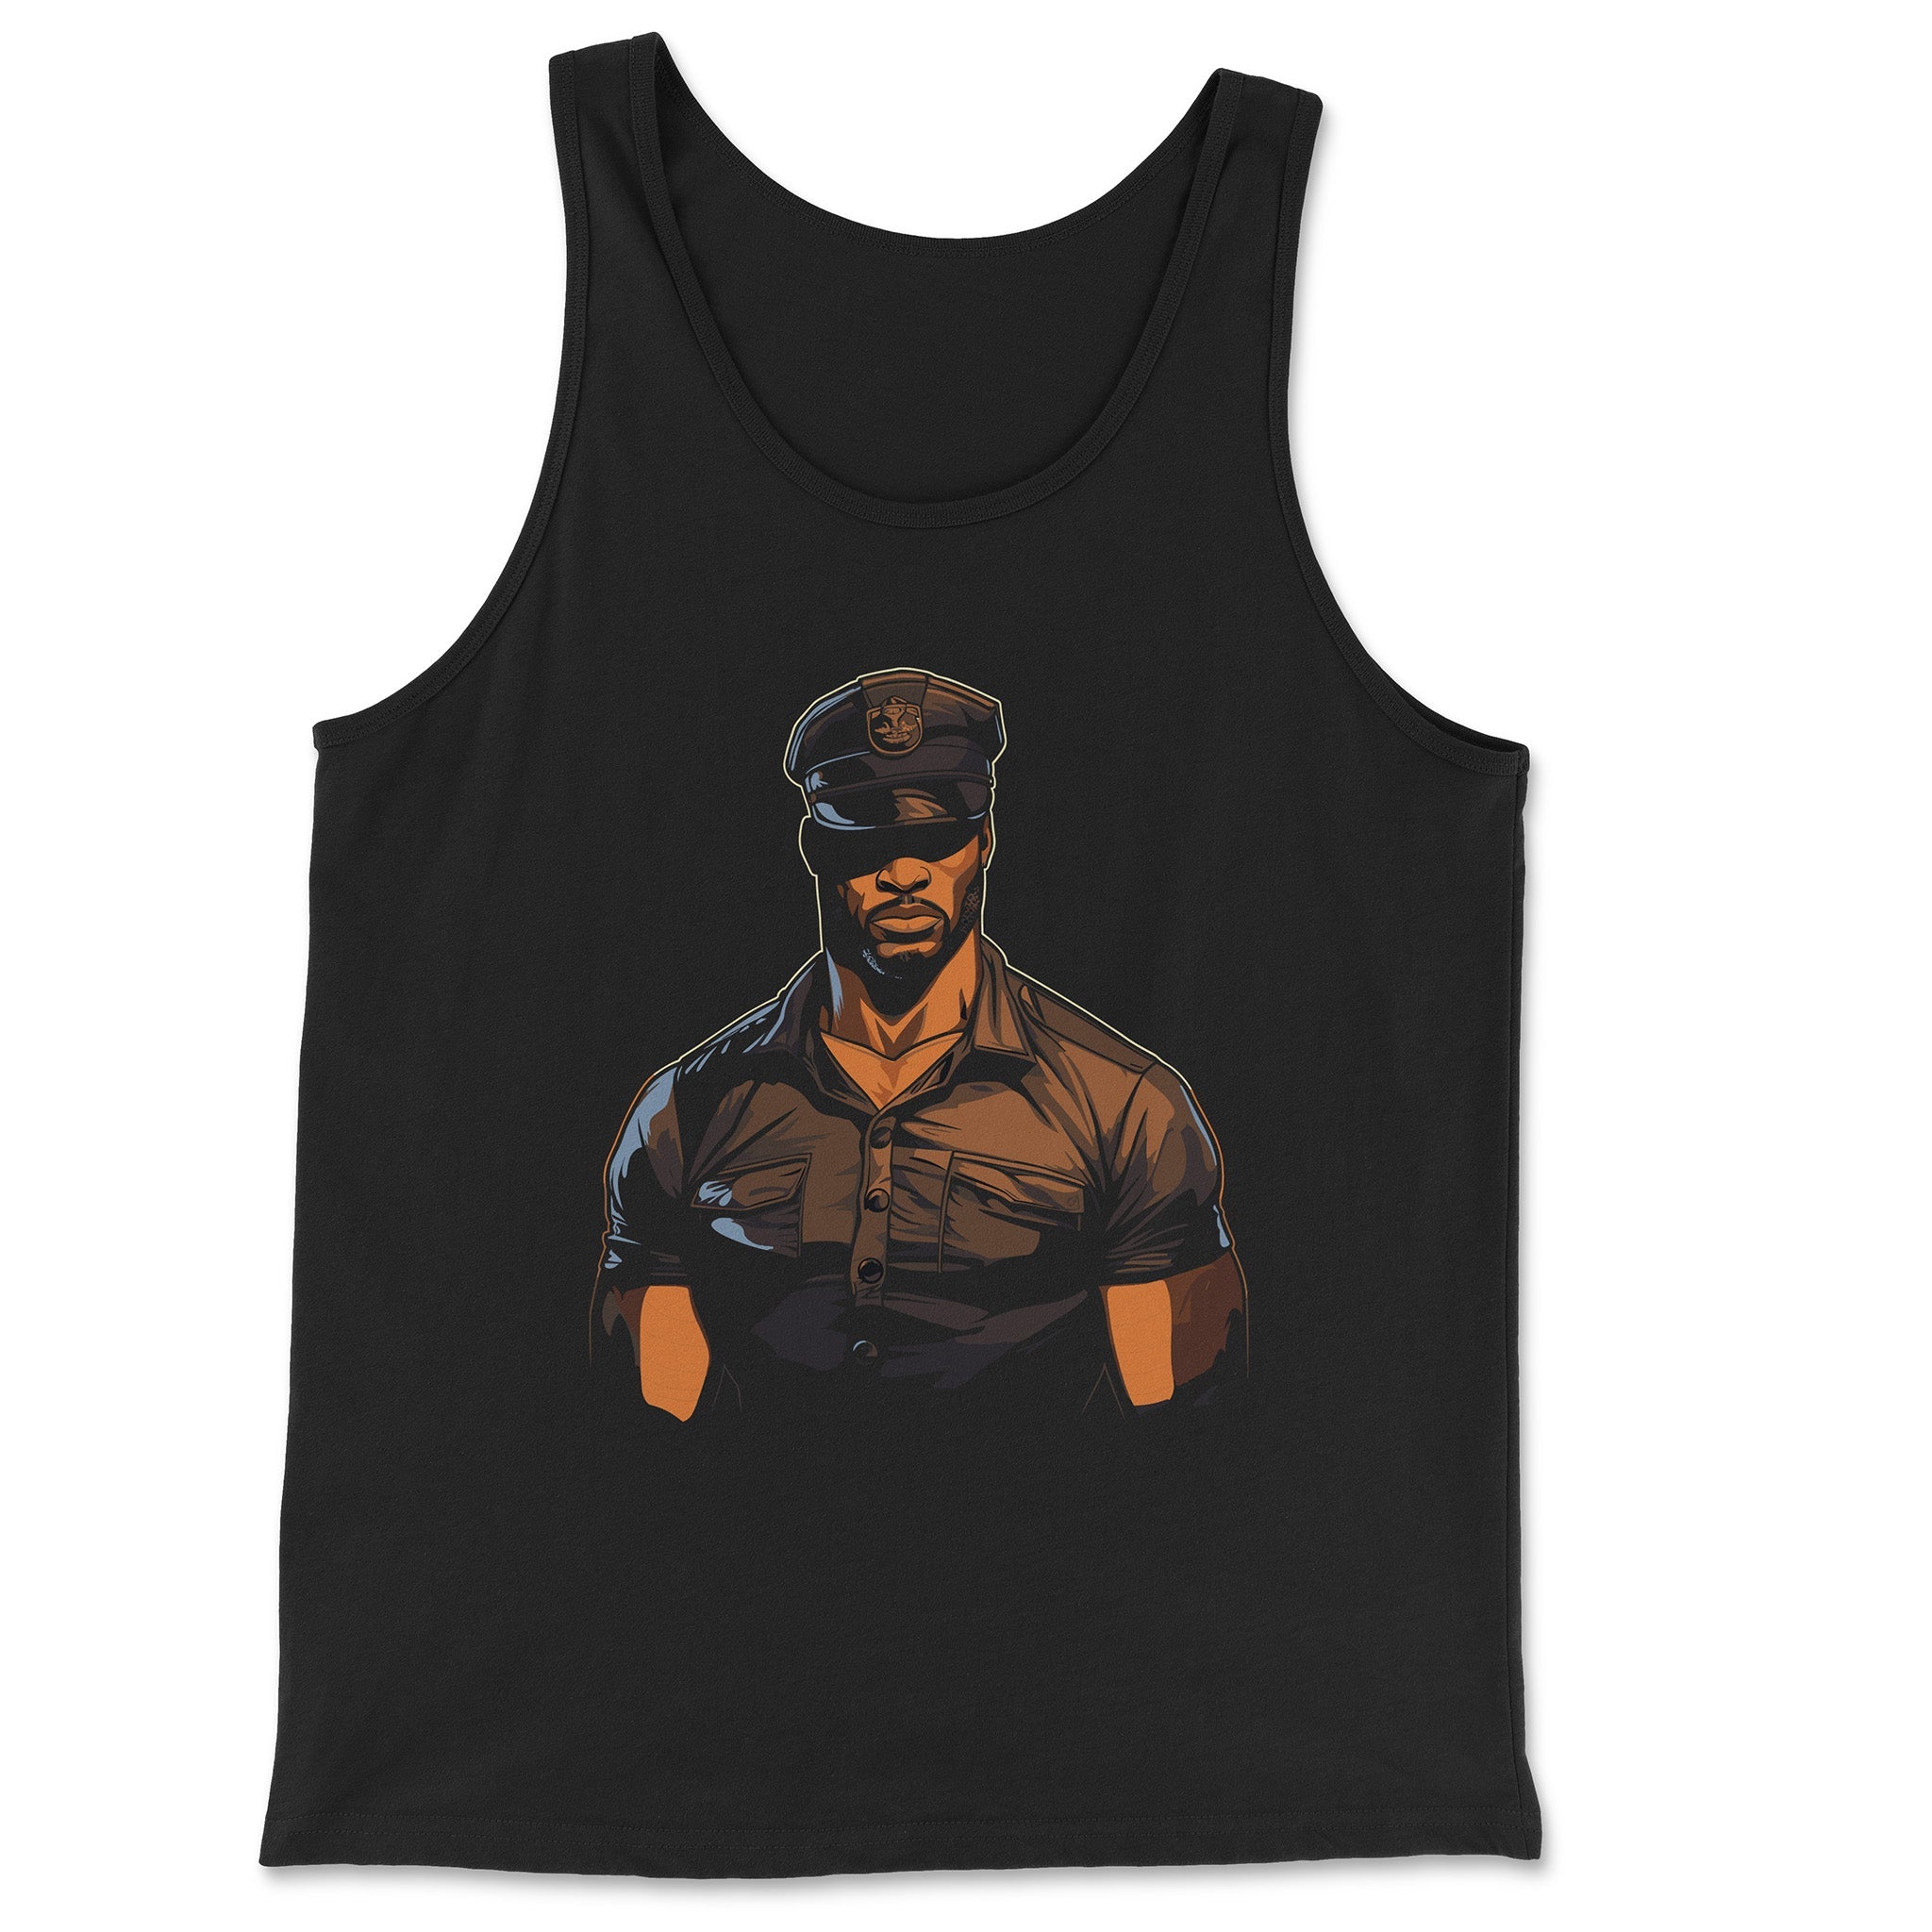 "Yes, Sir" Leather Scene-Inspired Tank Top - Hunky Tops